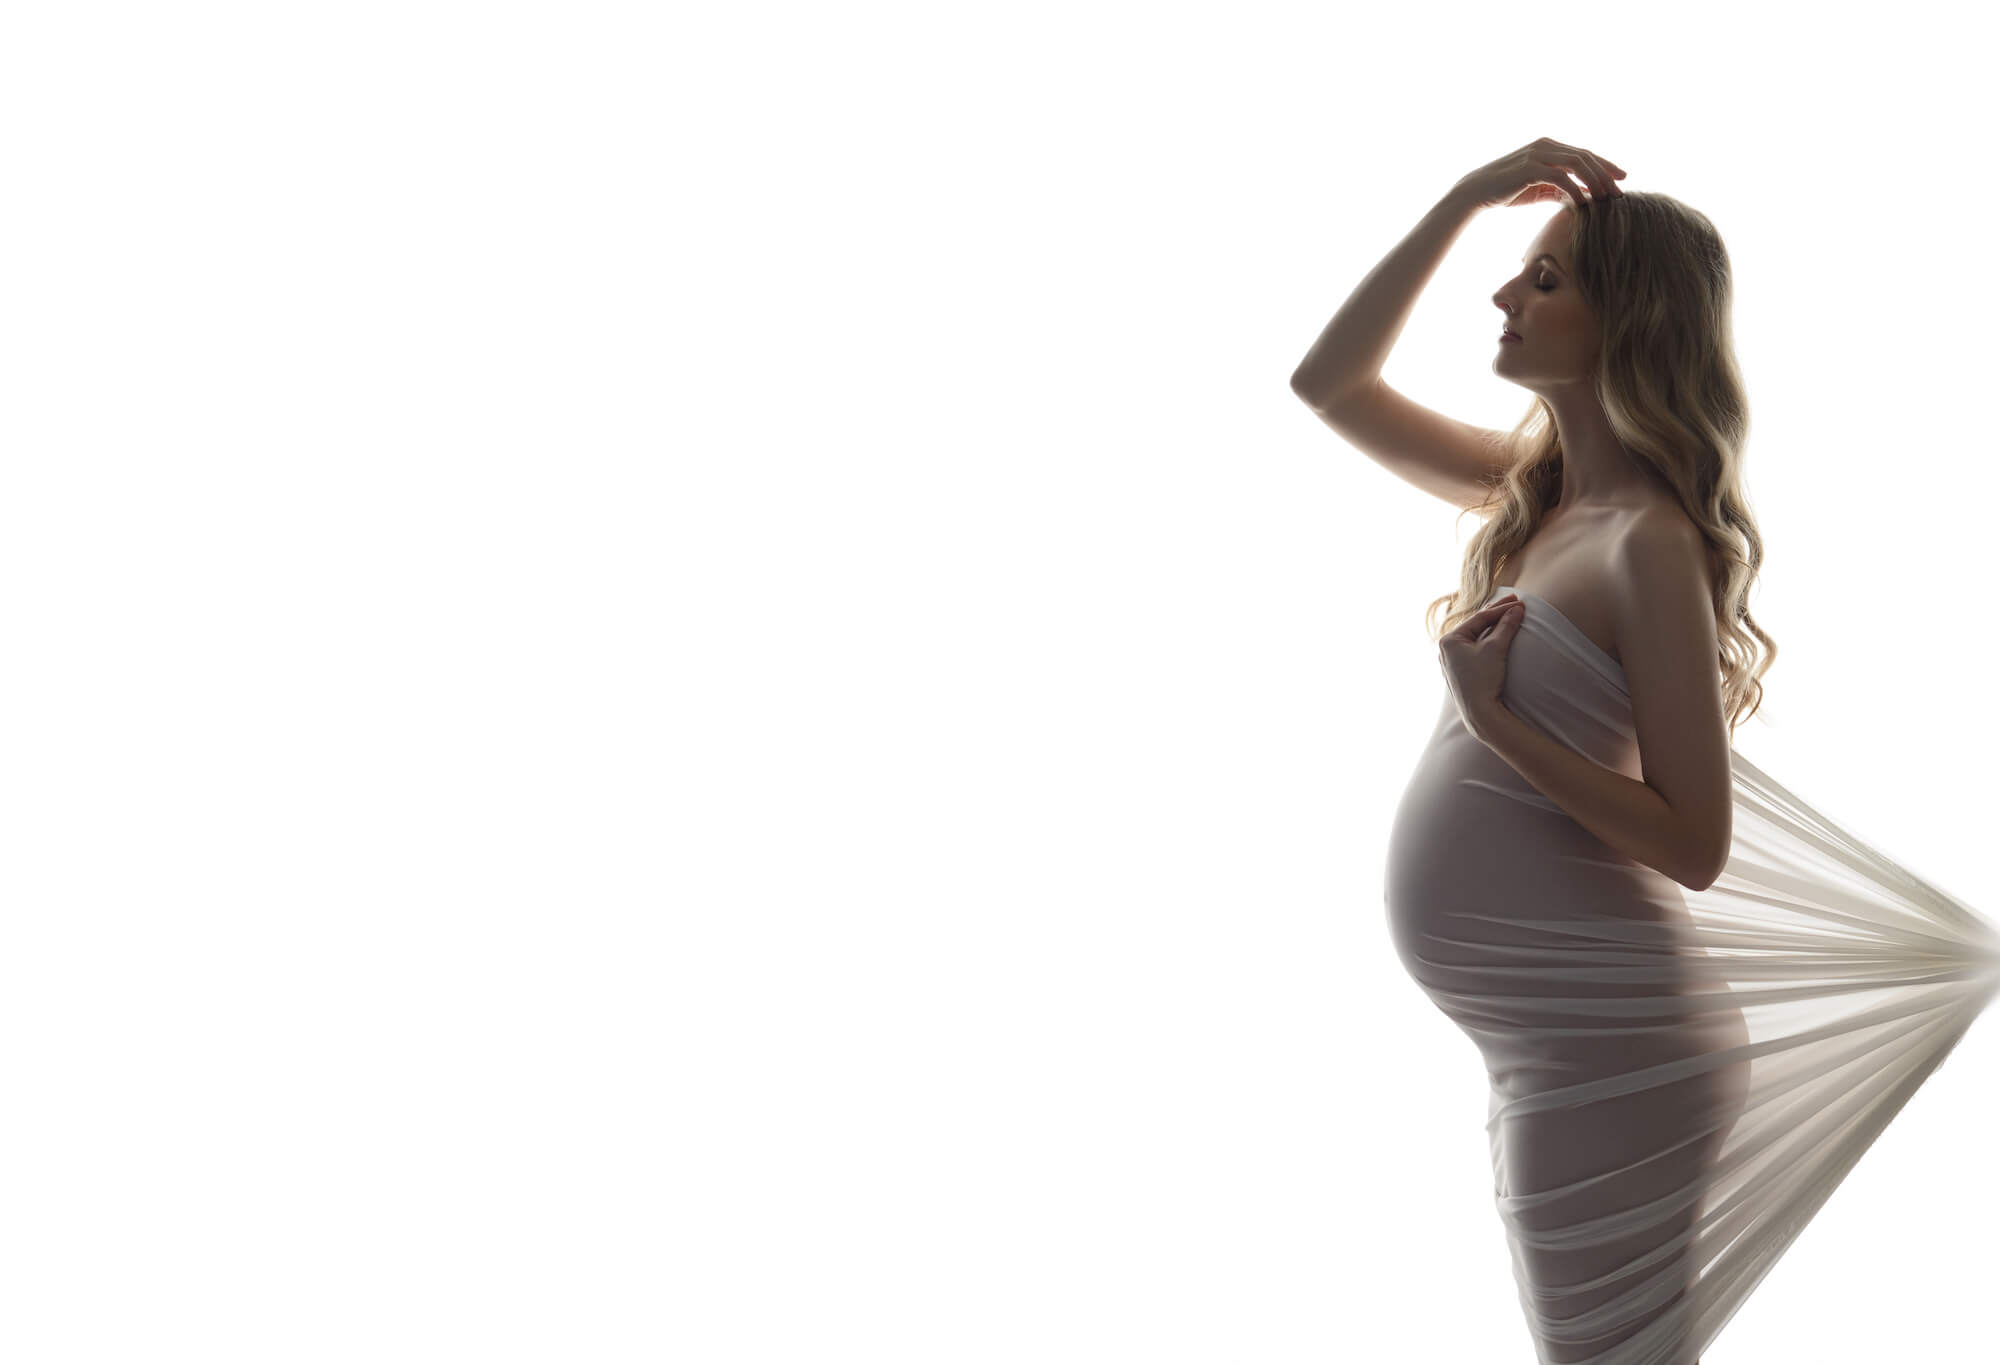 pregnancy photography near me, baby bump photography, maternity photoshoot in queens ny